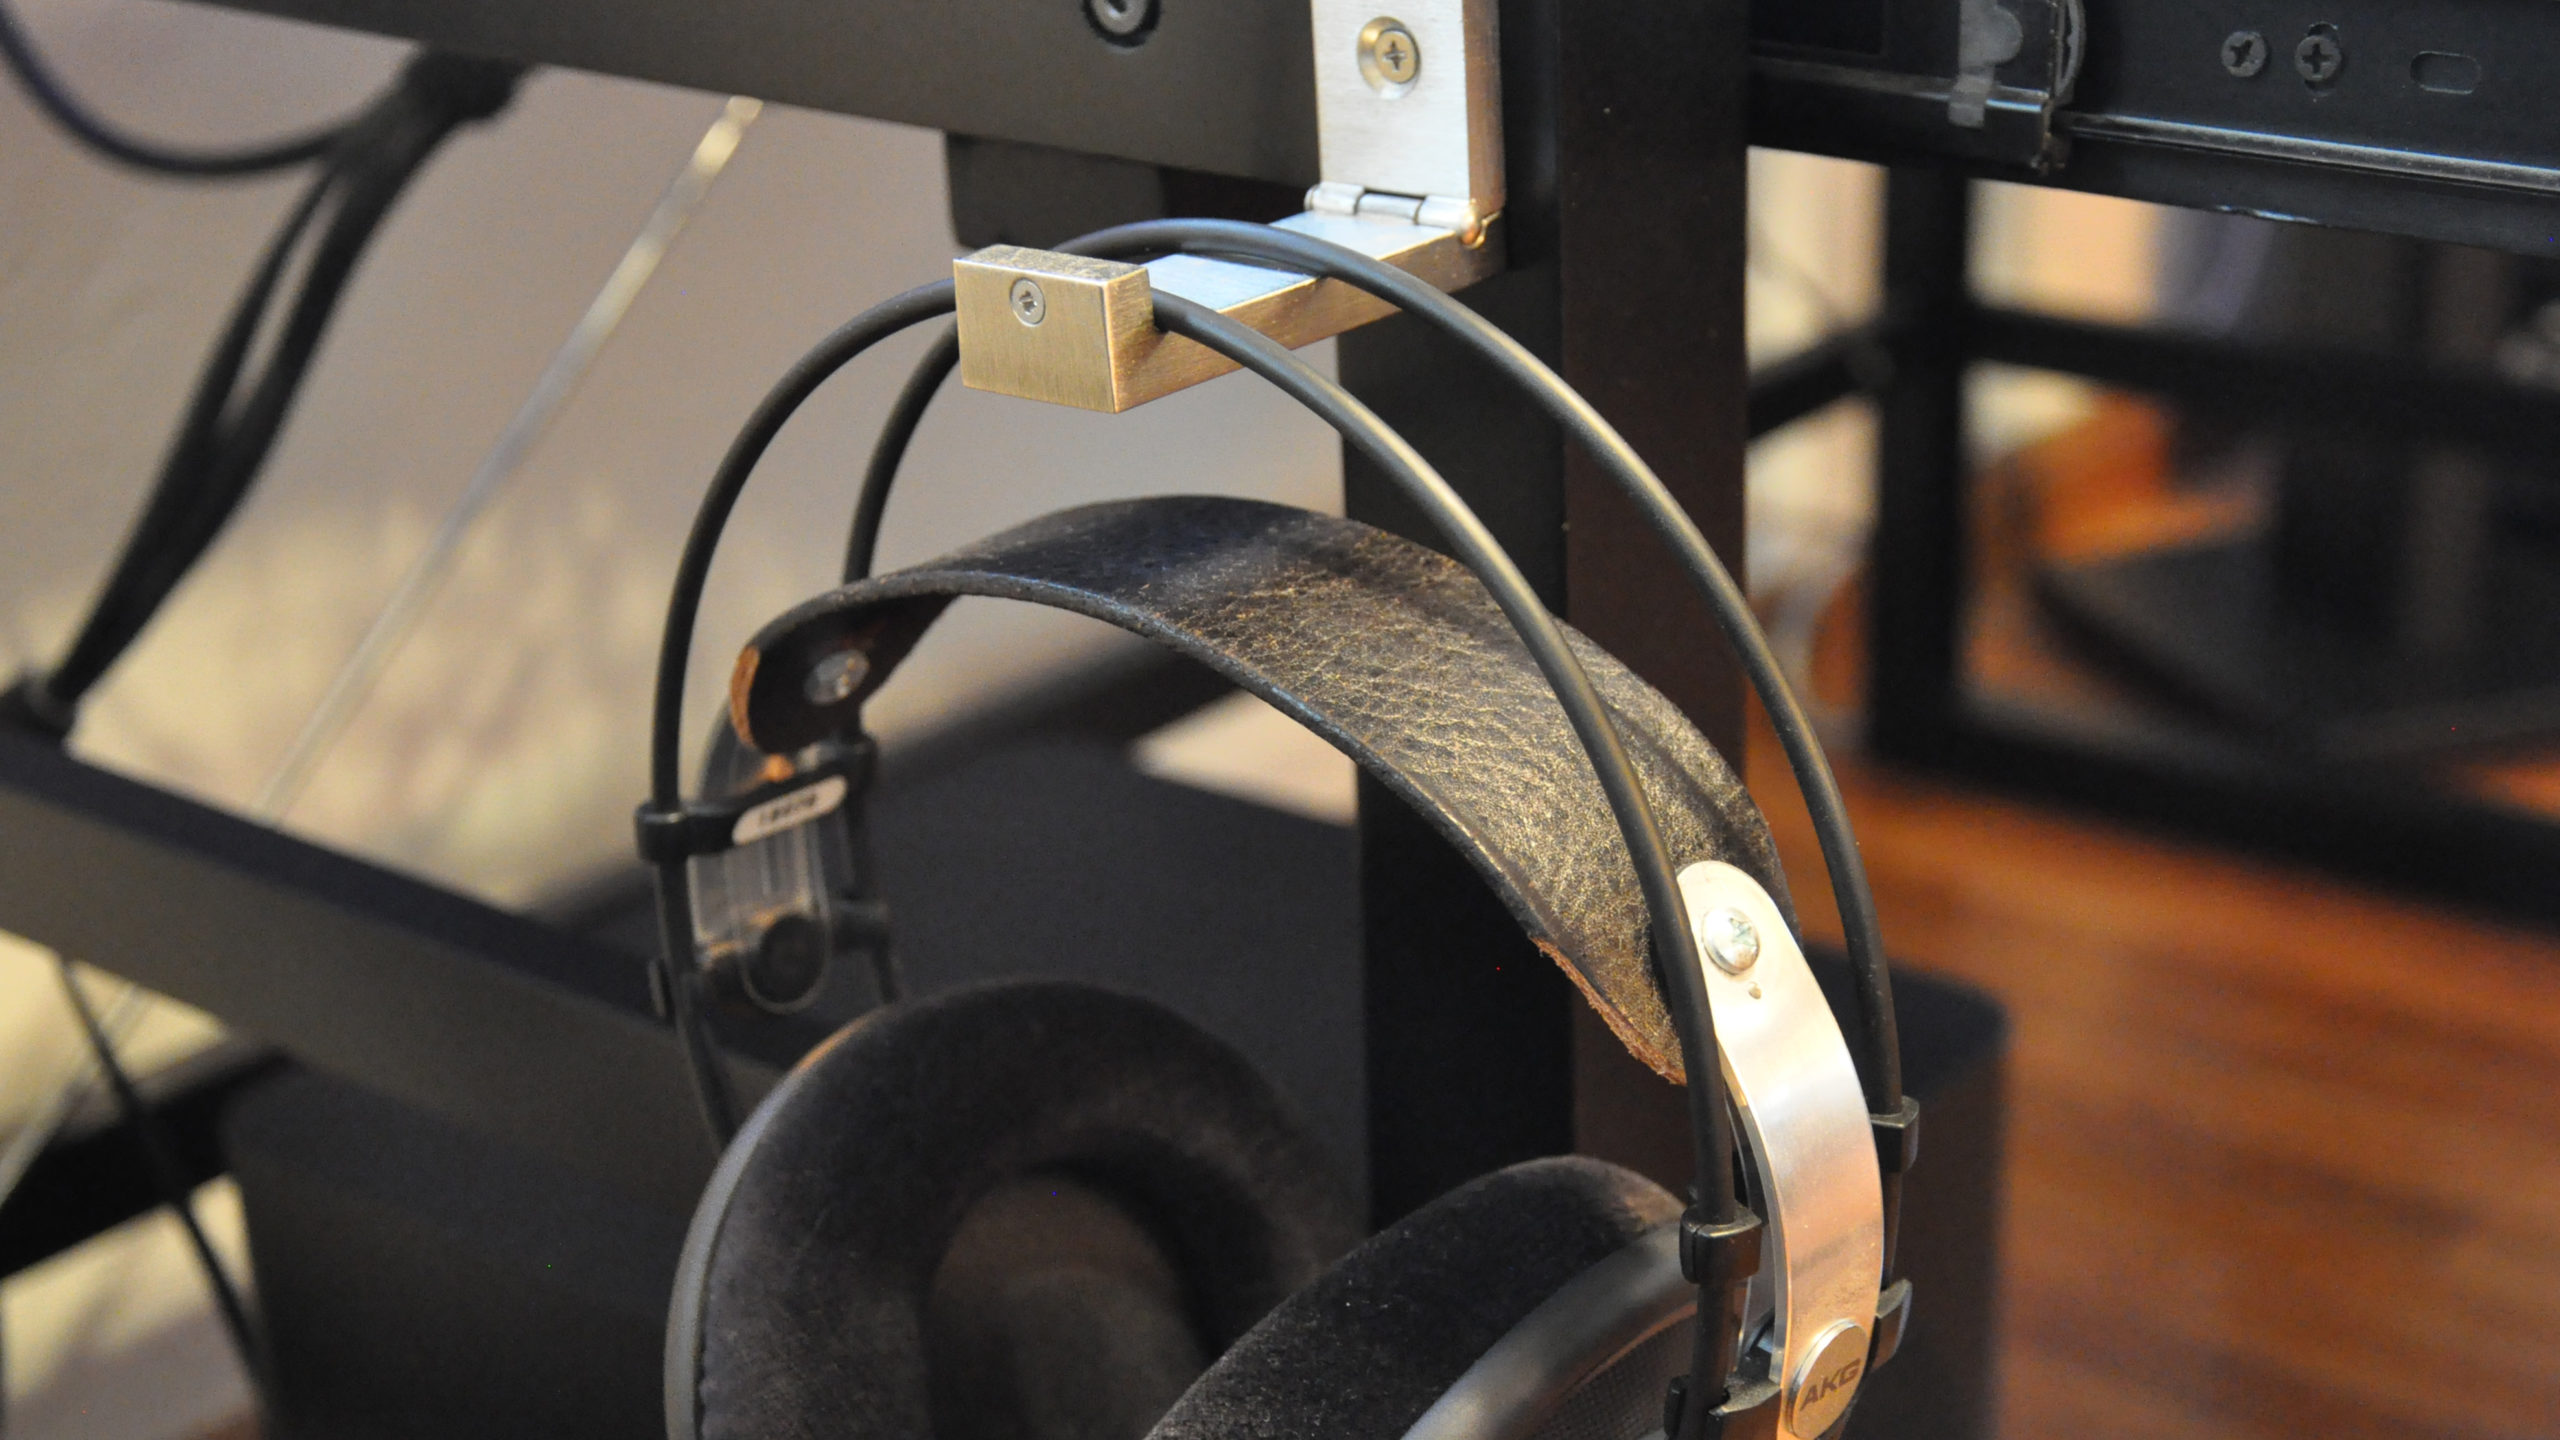 I’ve Found My Holy Grail Of Headphones: The AKG Q701